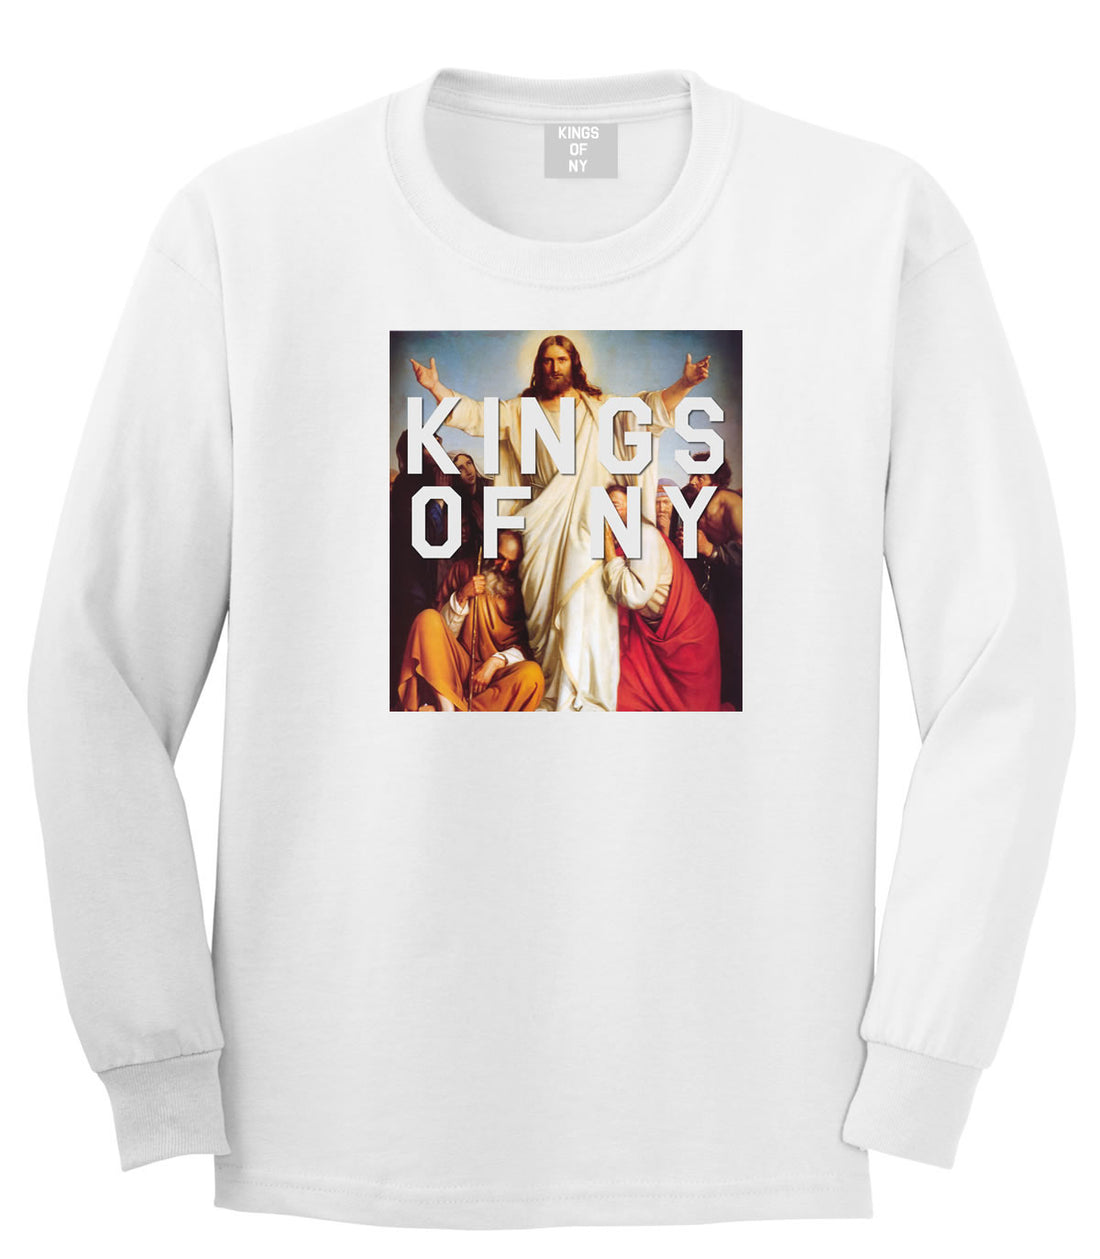 Jesus Worship and Praise of Power Long Sleeve T-Shirt in White By Kings Of NY